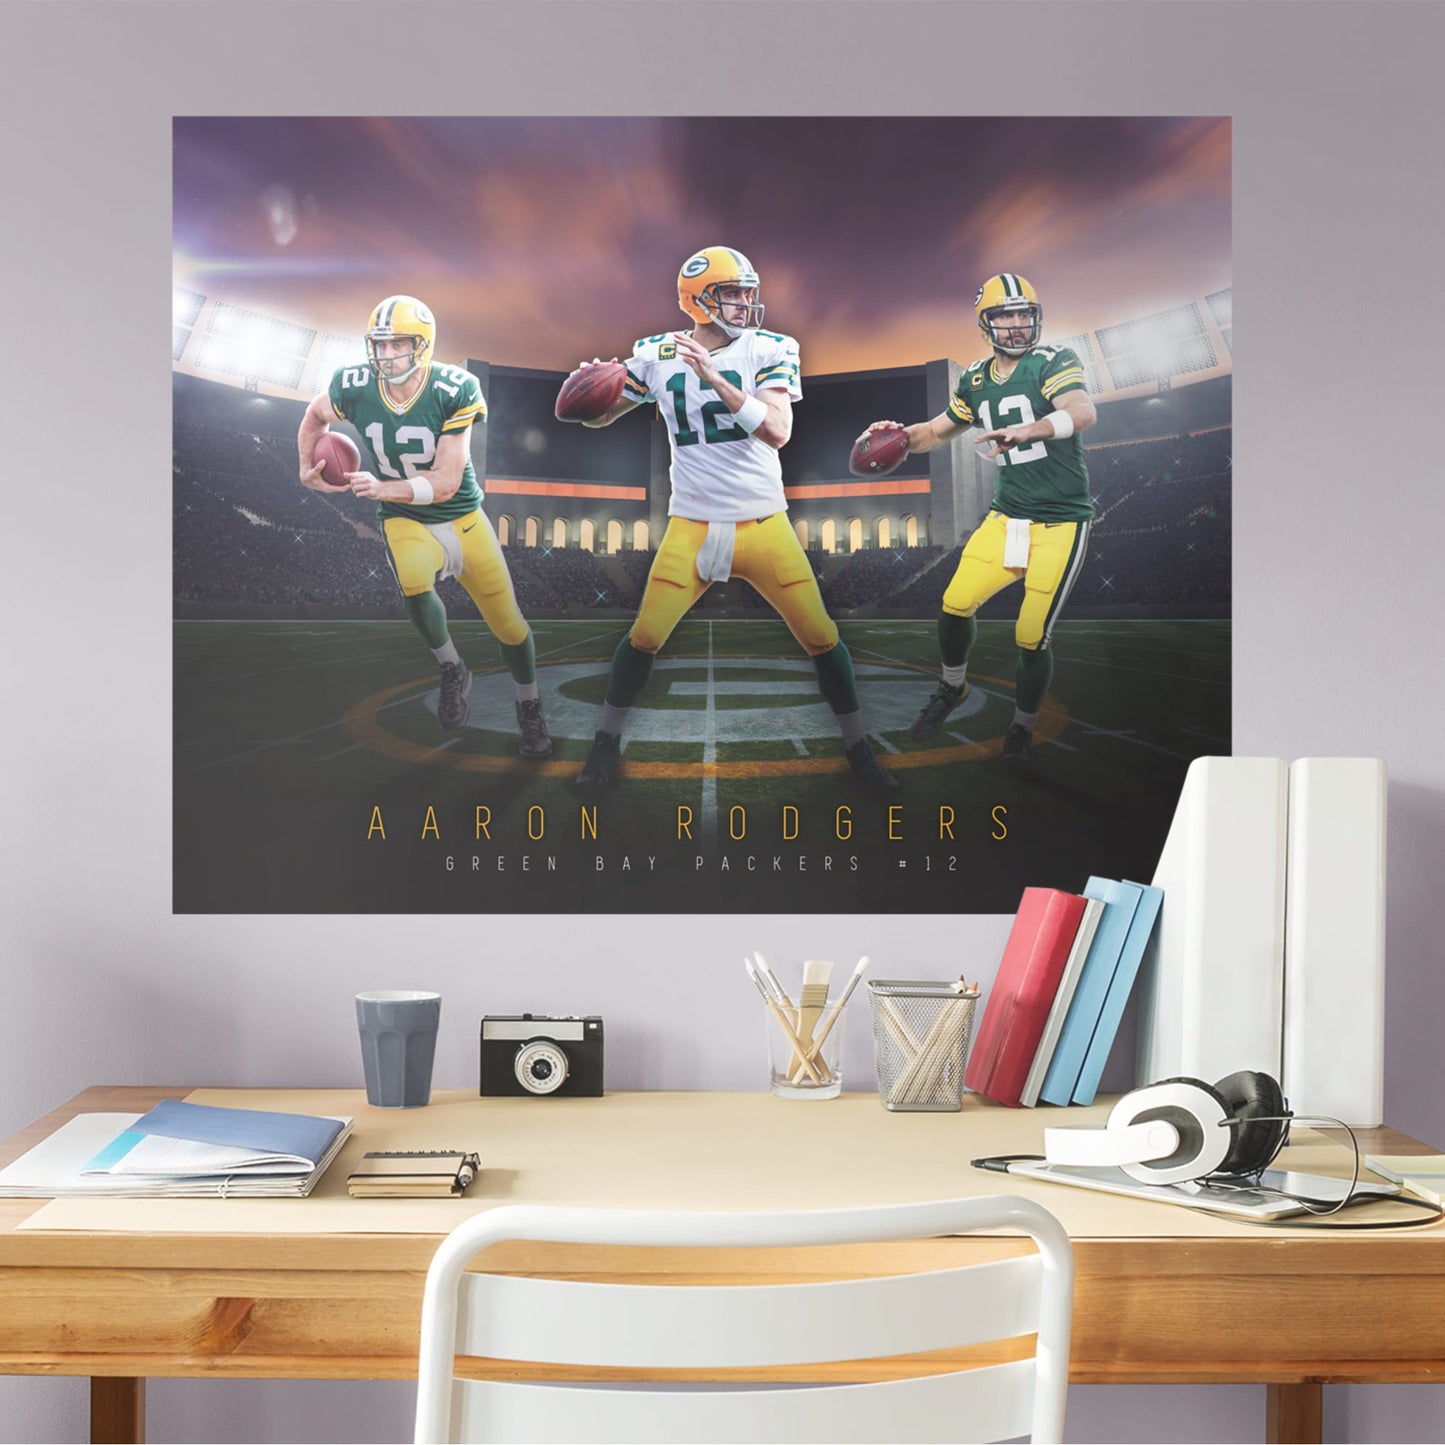 Green Bay Packers: Aaron Rodgers         - Officially Licensed NFL Removable Wall   Adhesive Decal